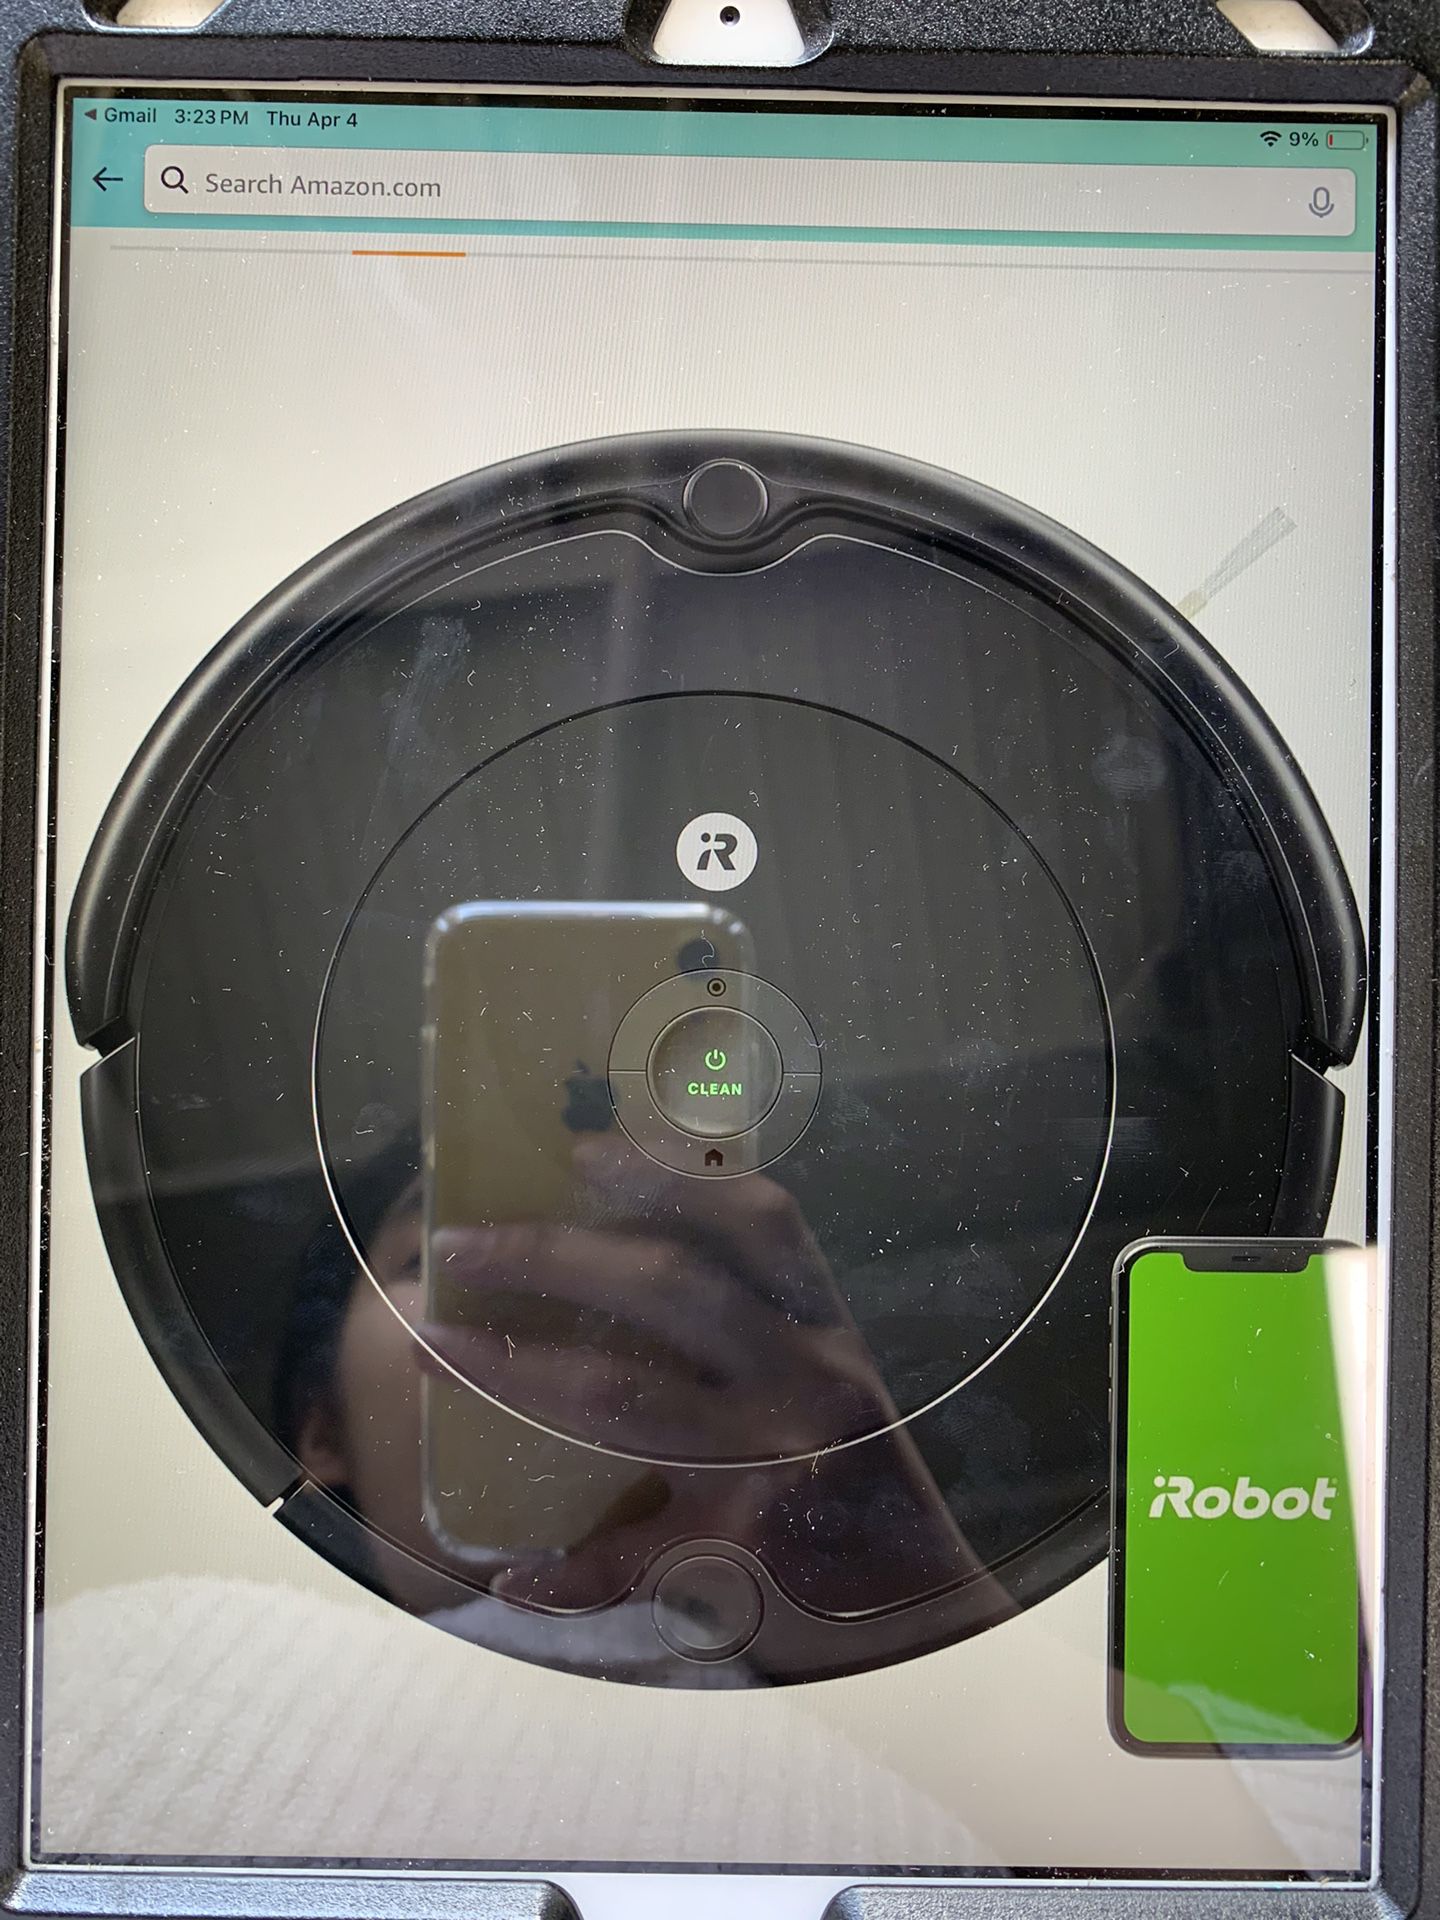 iRobot Roomba 692 Robot Vacuum - Wi-Fi Connectivity Personalized Cleaning Recommendations, Works with Alexa, Good for Pet Hair, Carpets, Hard Fl@B15